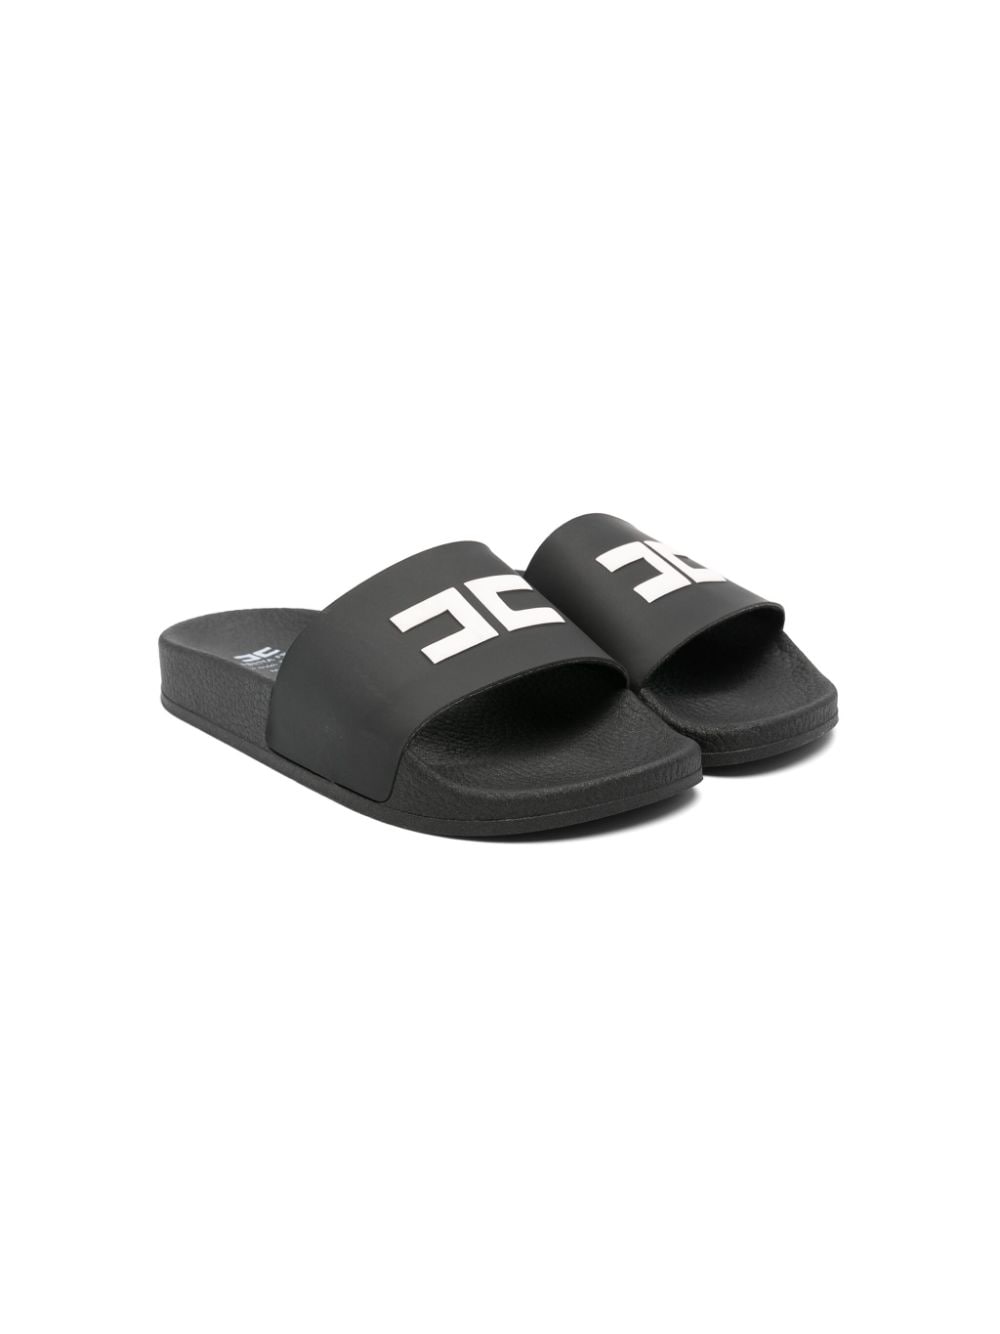 Black slippers for girls with logo